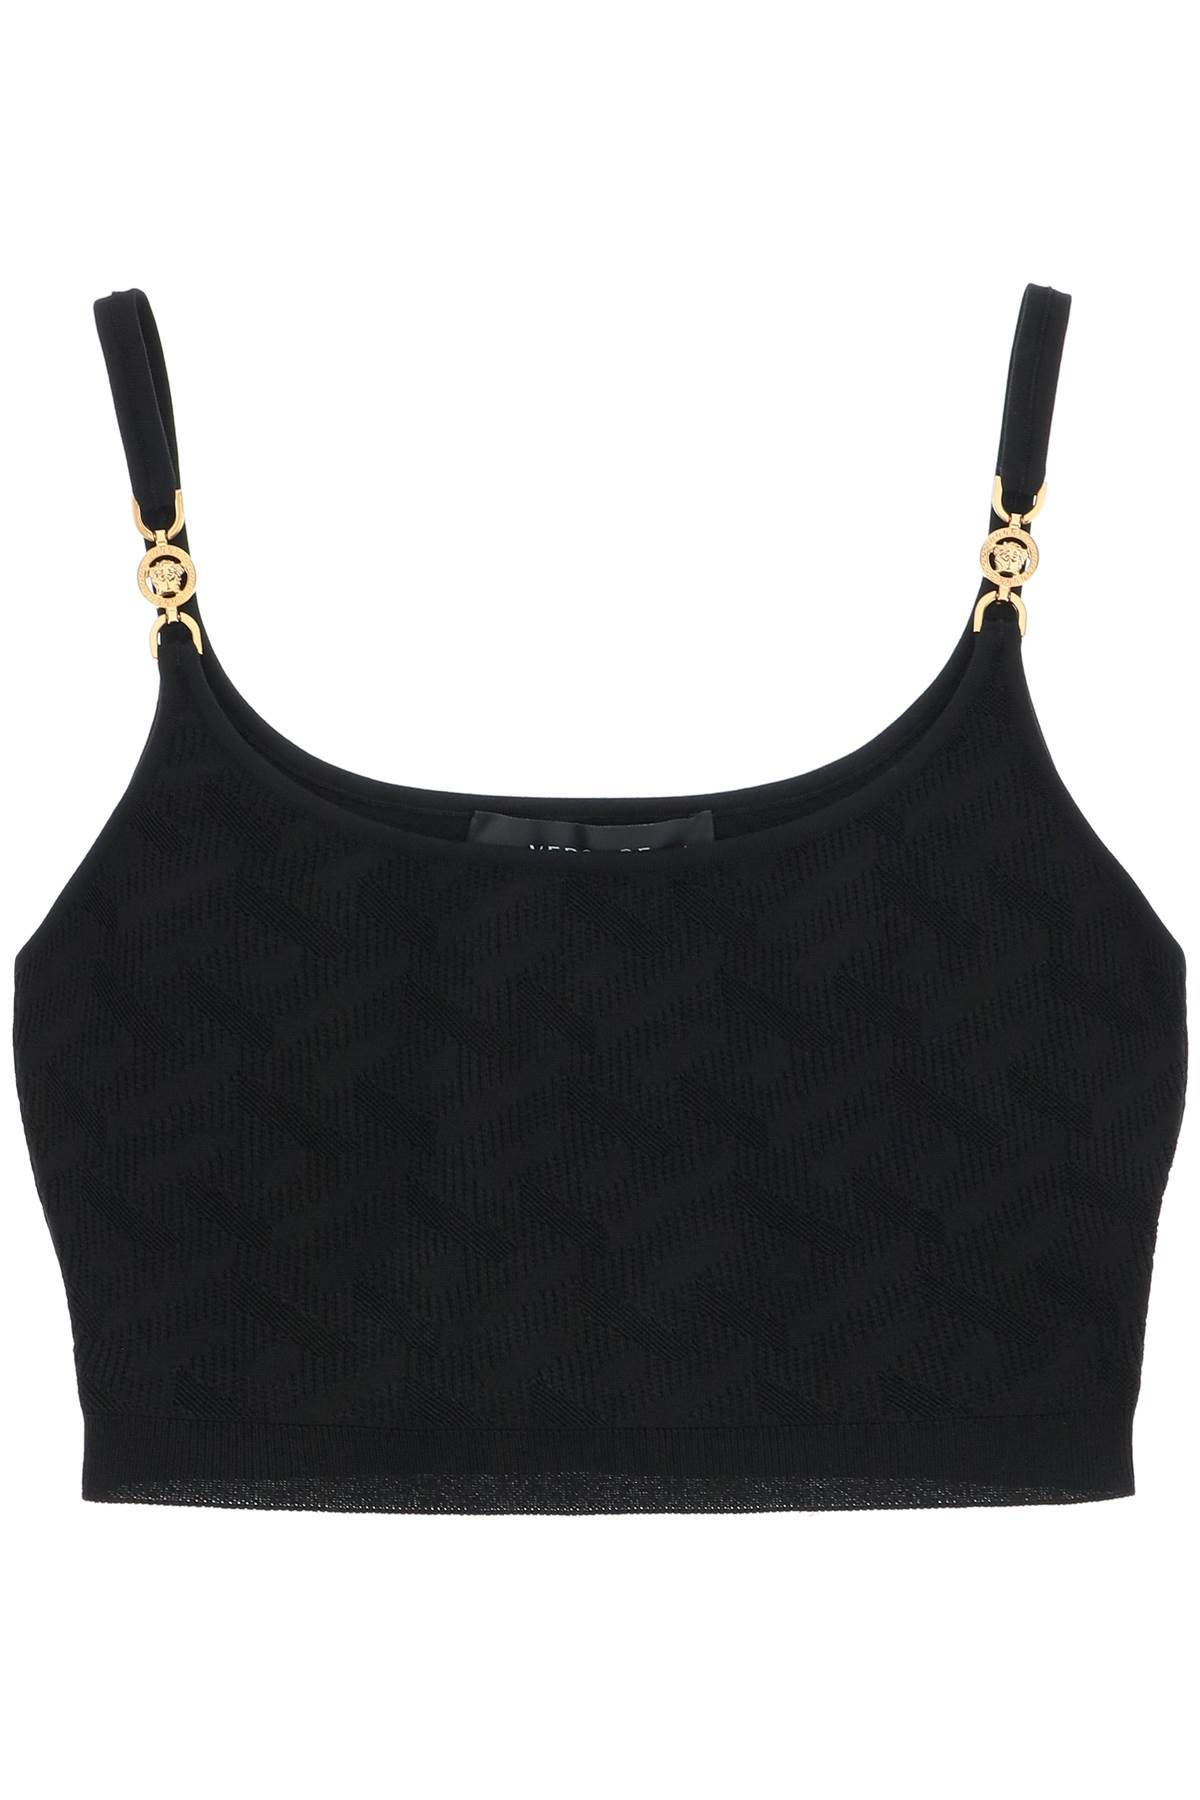 Versace VERSACE 'la greca' knitted cropped top